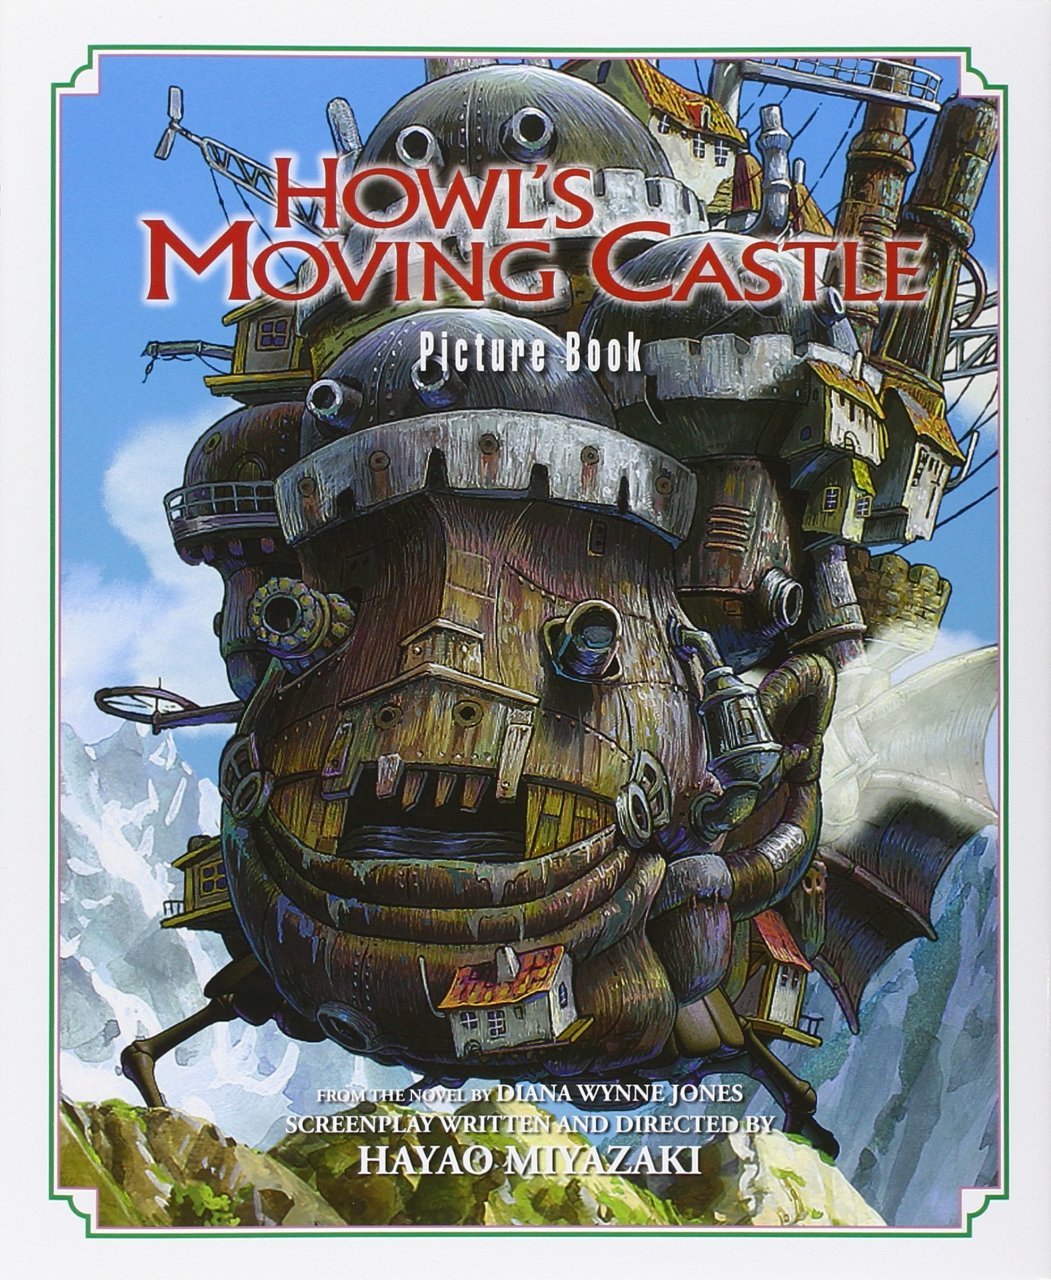 howls moving castle movie sub